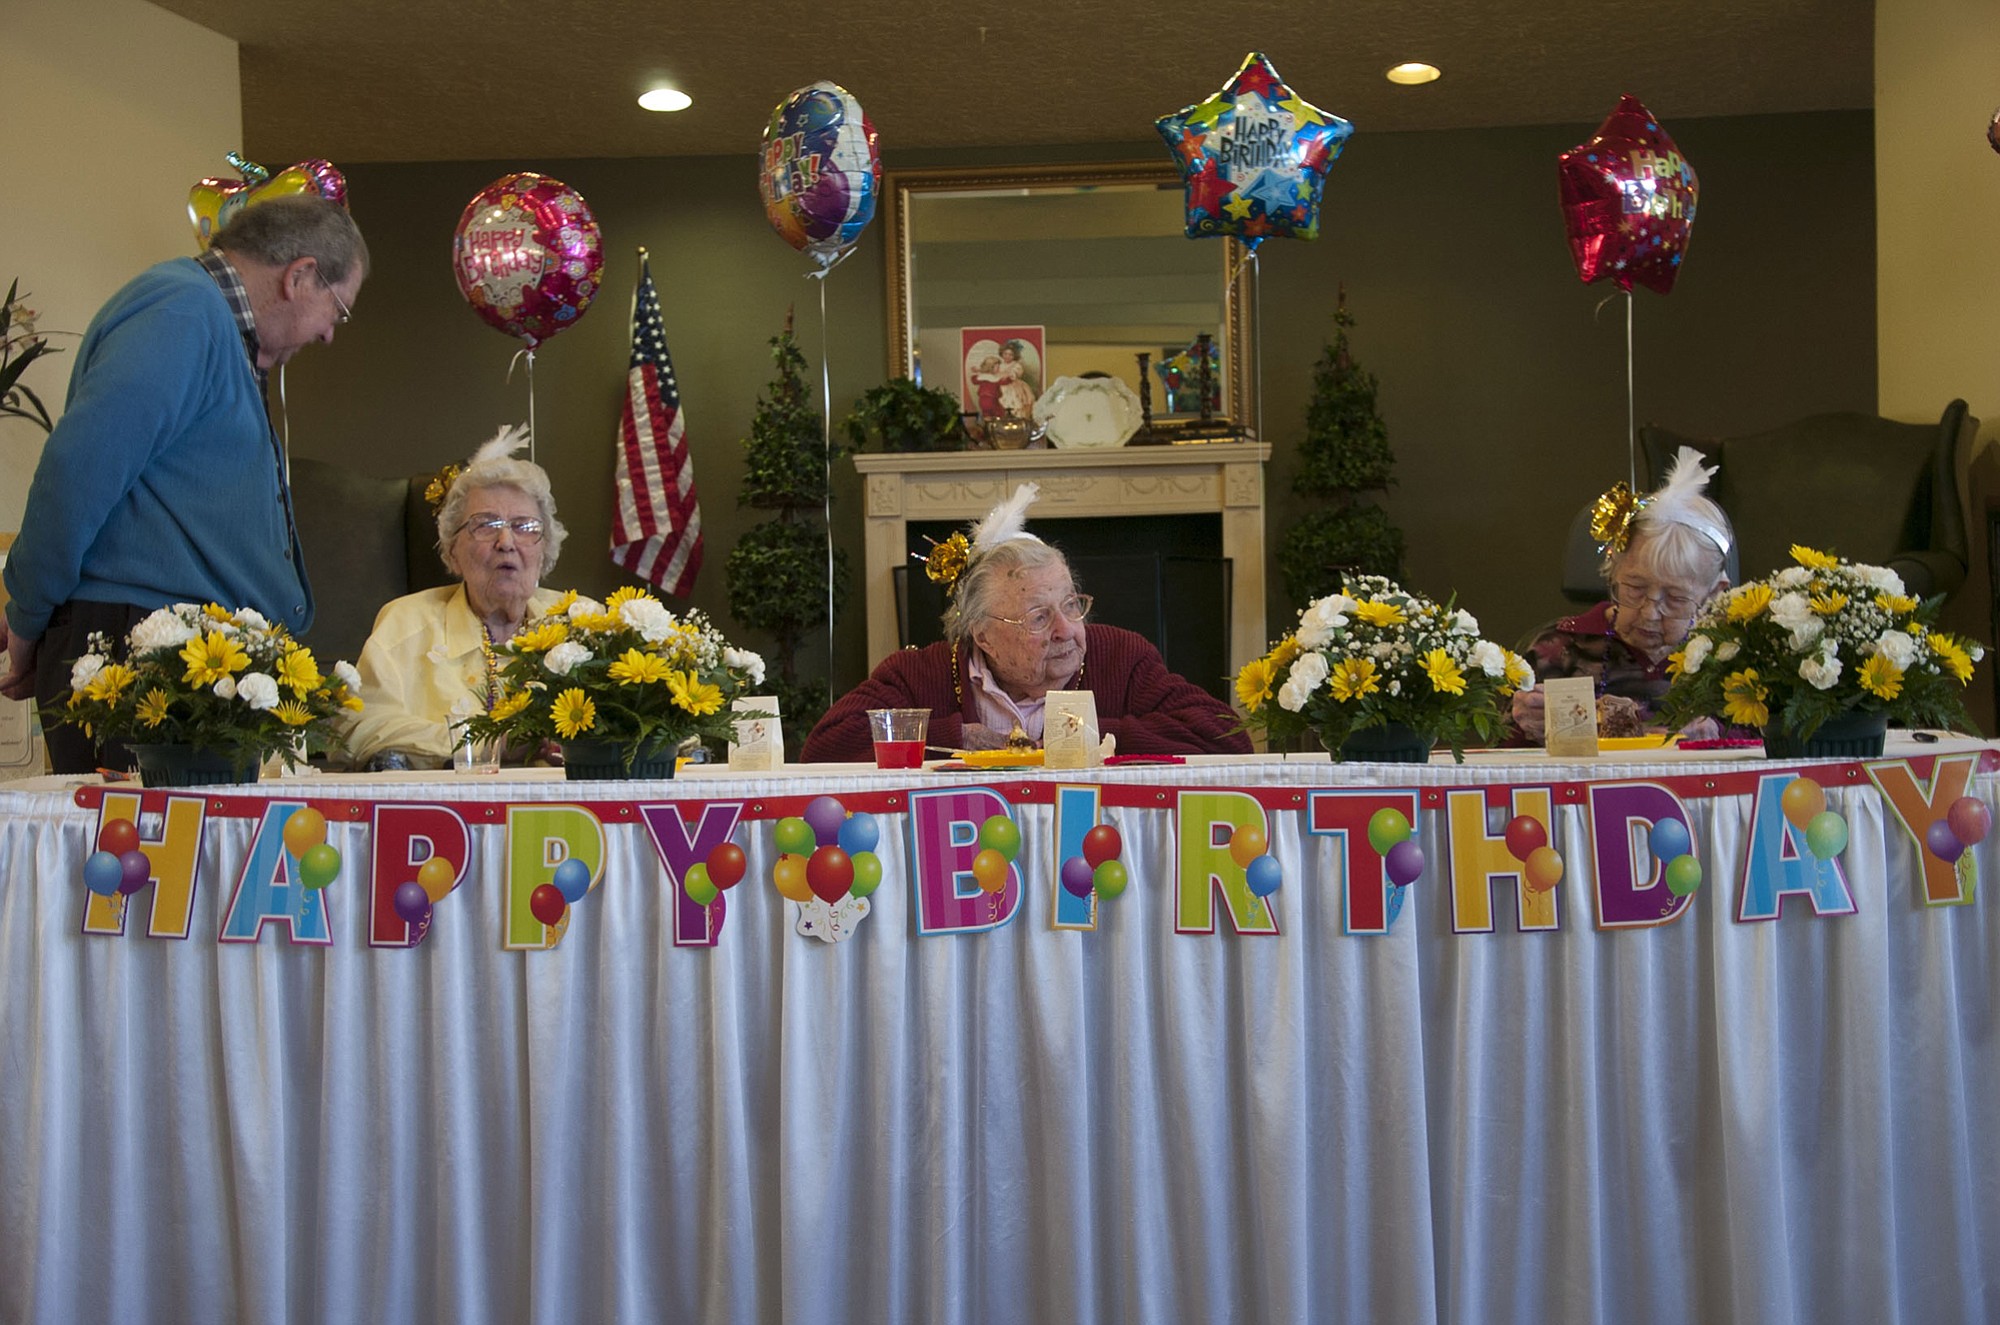 Seated from left, Esther Friberg, Wilma Zillman and Dolly Anders are the guests of honor Sunday during a birthday celebration at the Cascade Inn retirement home in Vancouver.